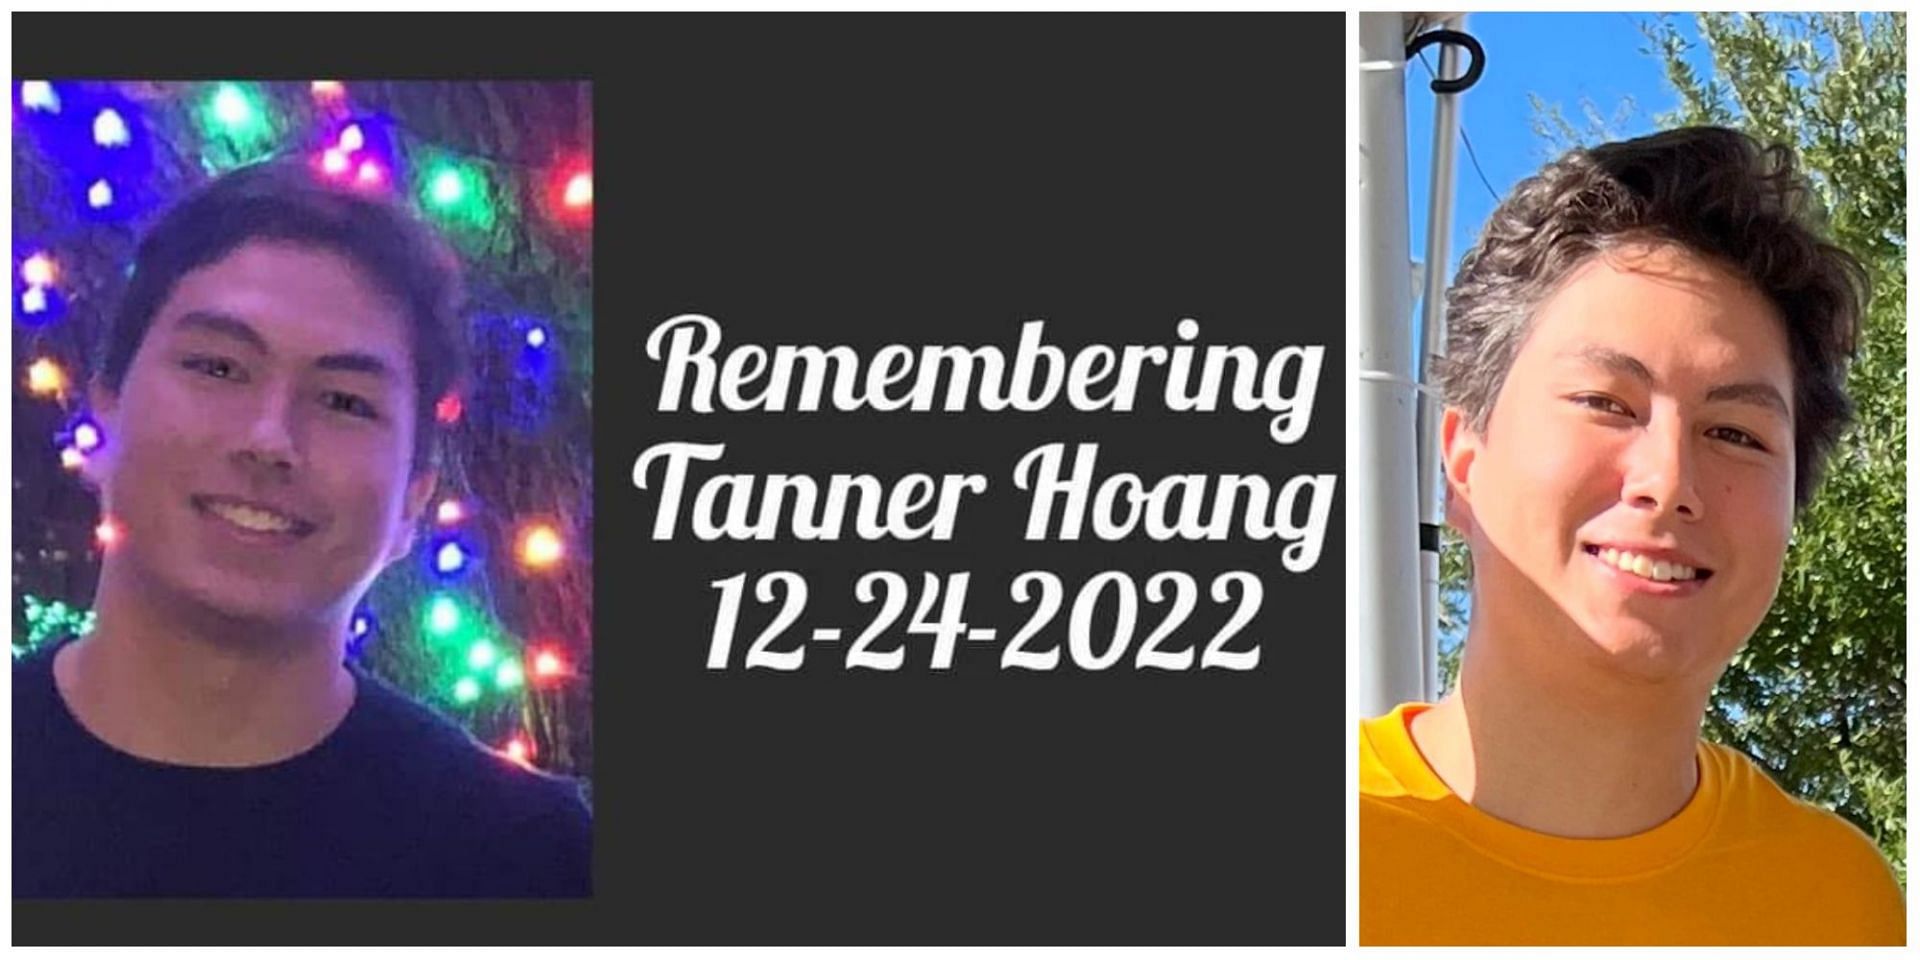 Missing Texas boy, Tanner Hoang found dead after he went missing on December 16, 2022. (Image via Finding Tanner Hoang/ Facebook)